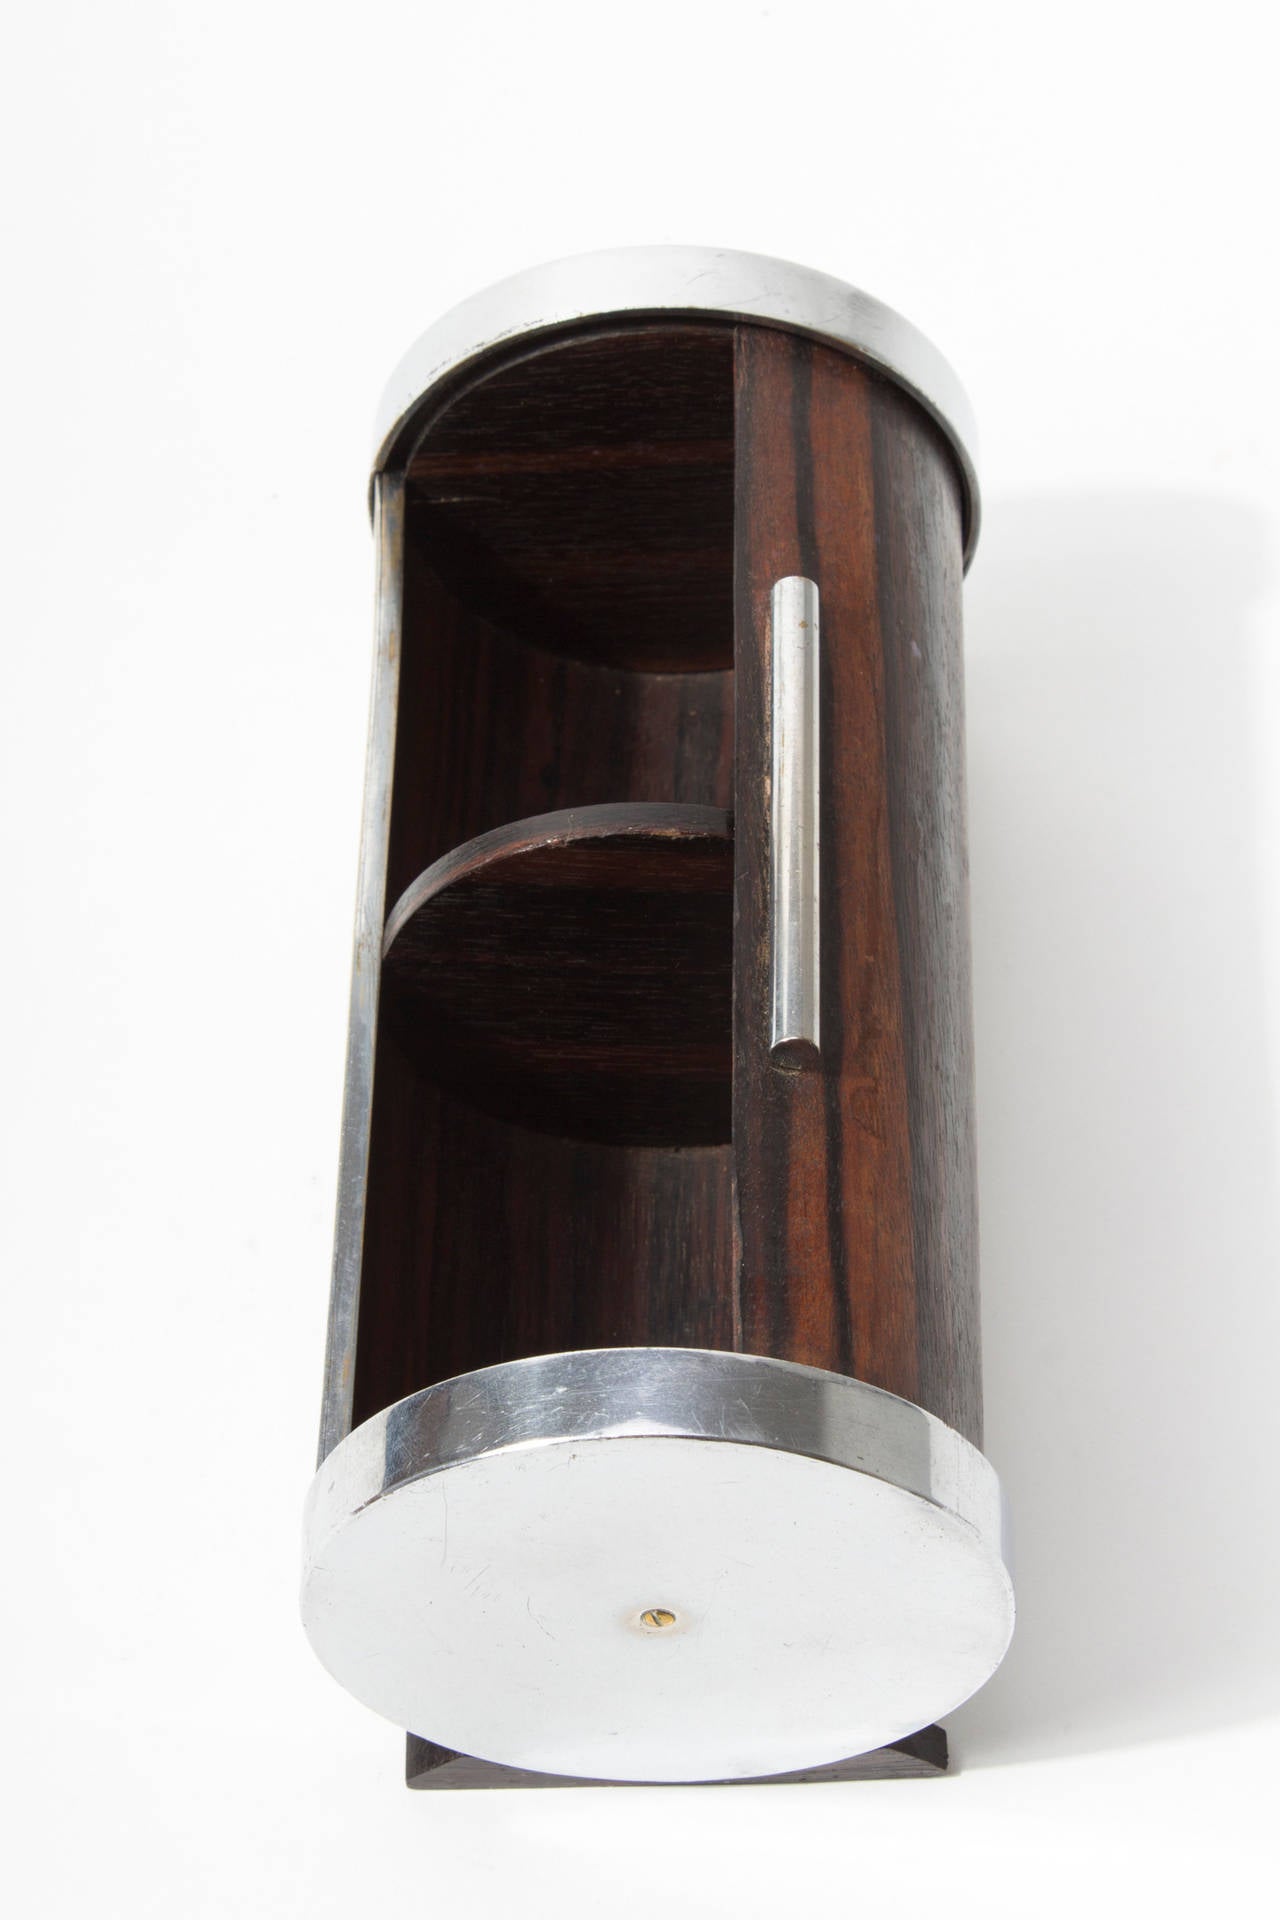 Rare Cylindrical Nickel Plated Cigarette Dispenser by Carl Auböck In Excellent Condition For Sale In Vienna, Vienna